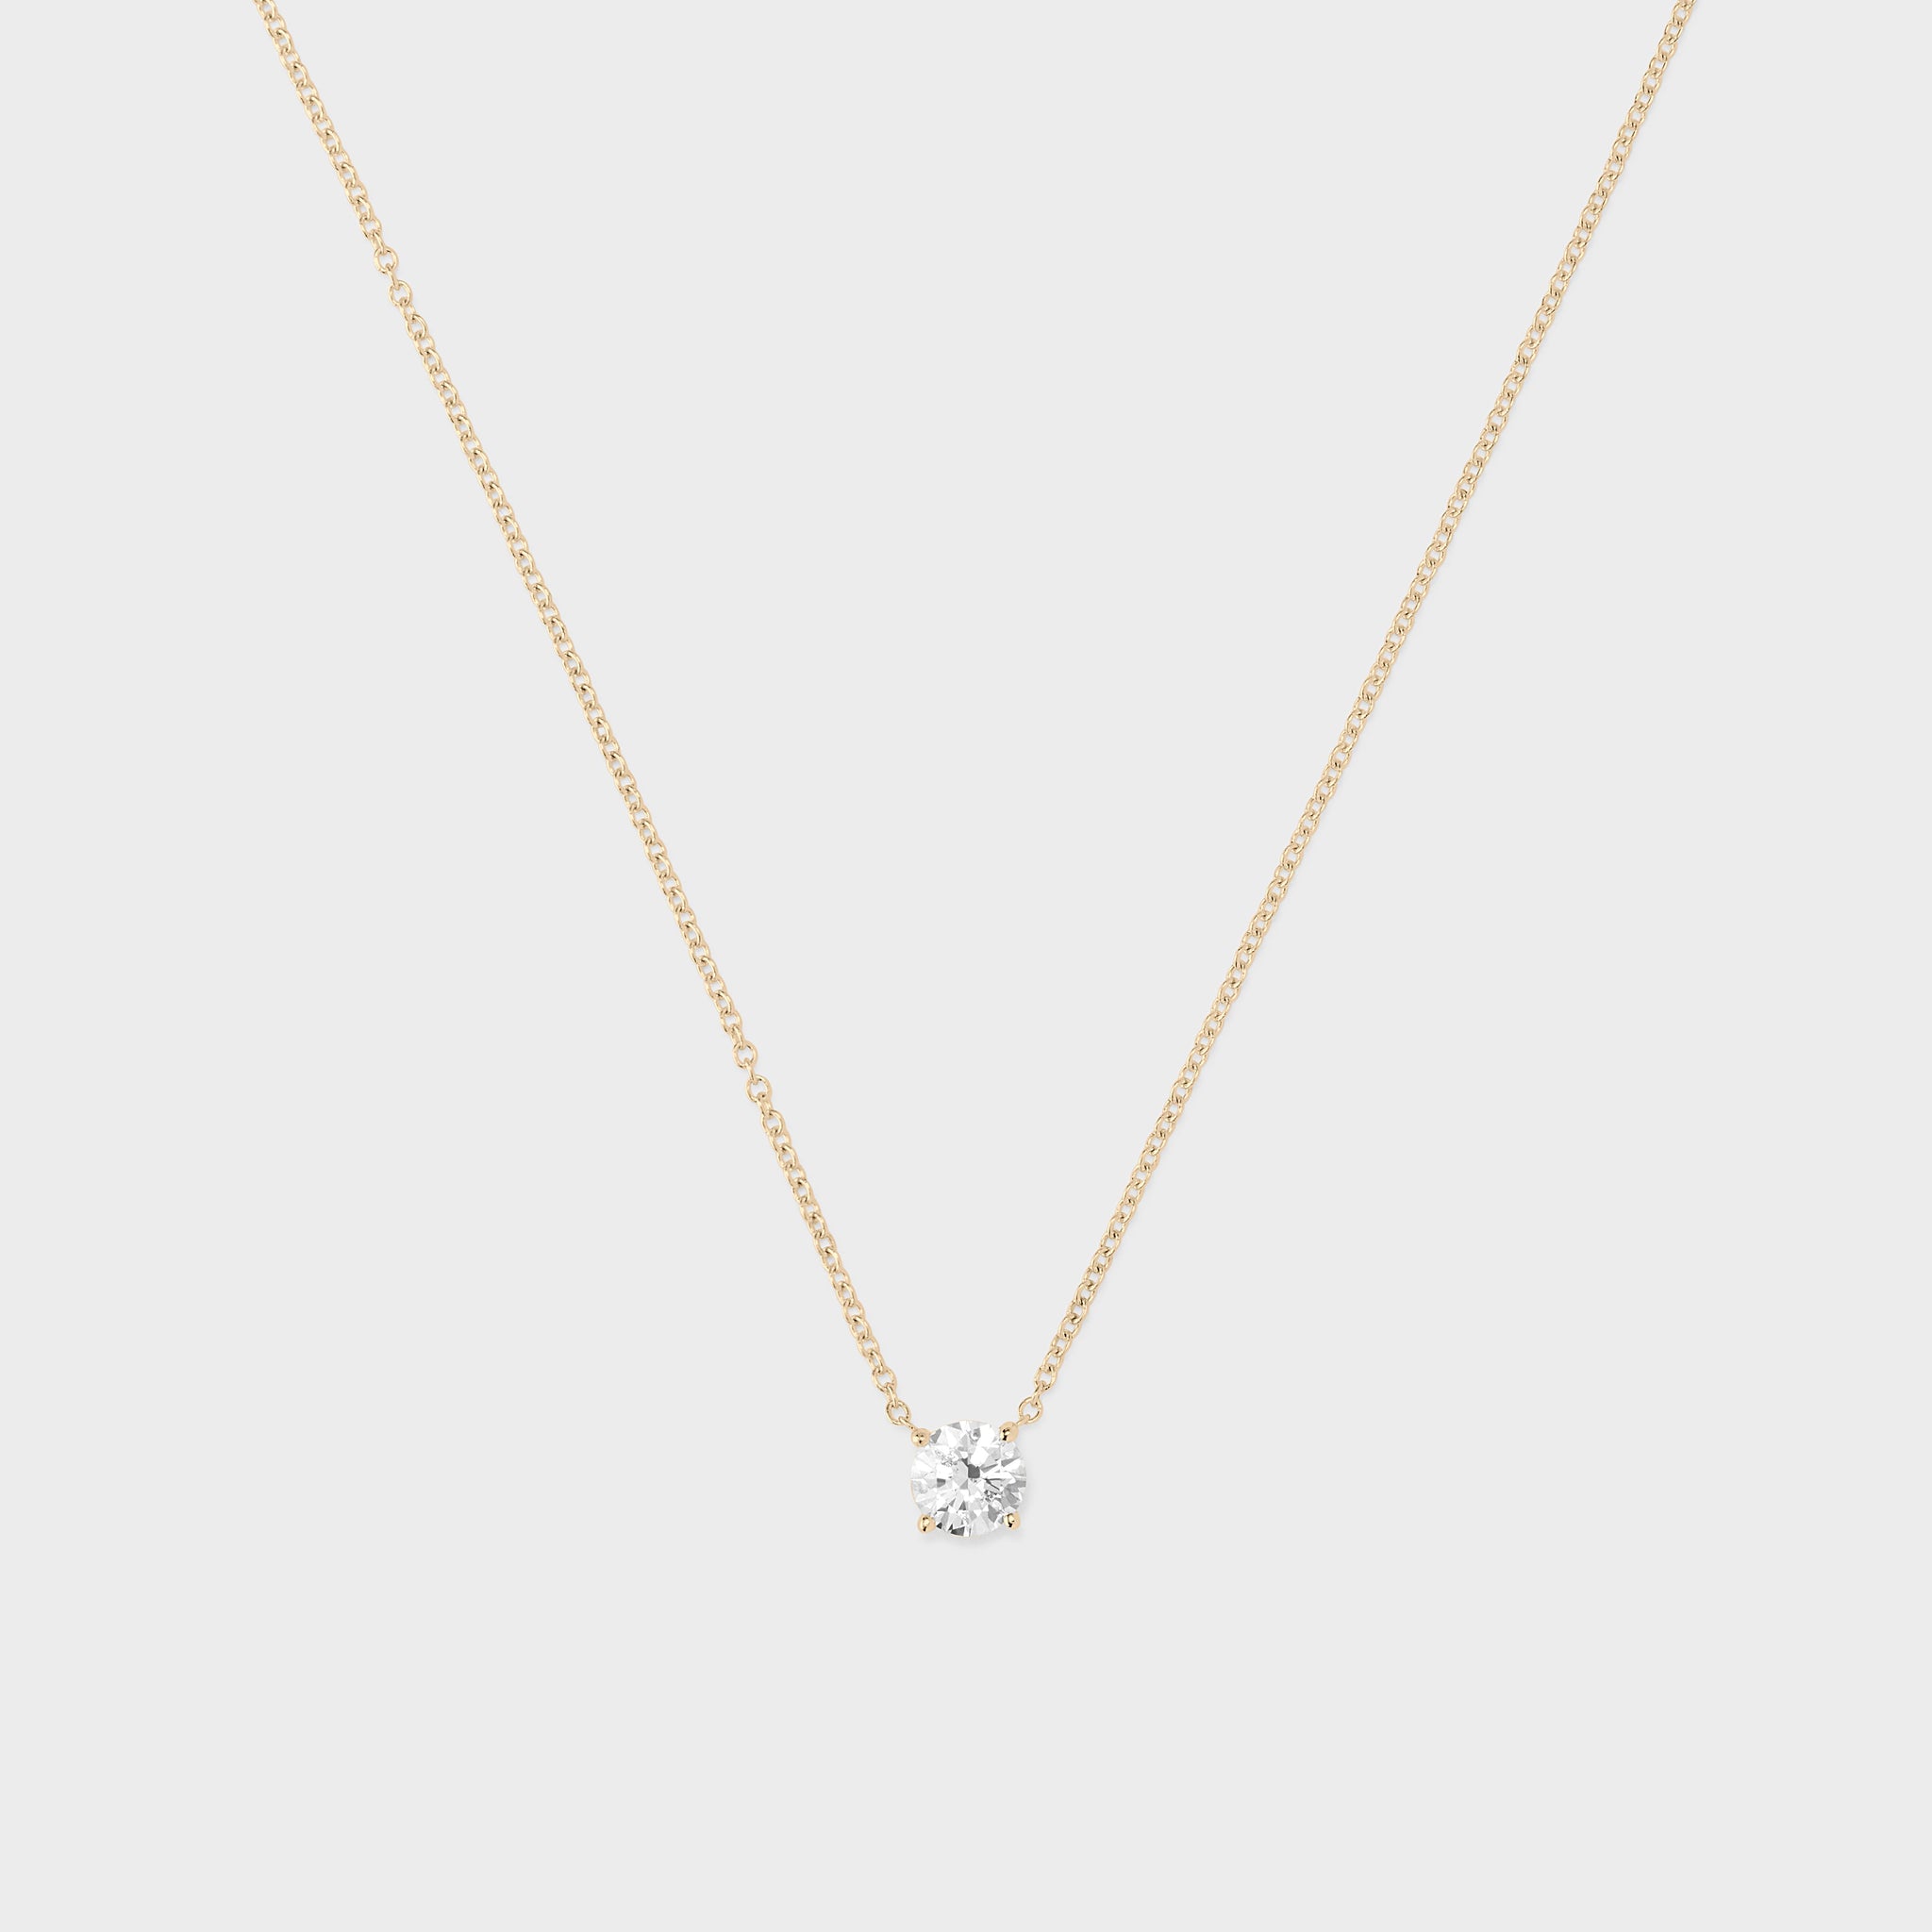 Lab Grown Diamond Necklaces, Pendants & Chains Made with 18K Recycled Gold  | Kimaï EU